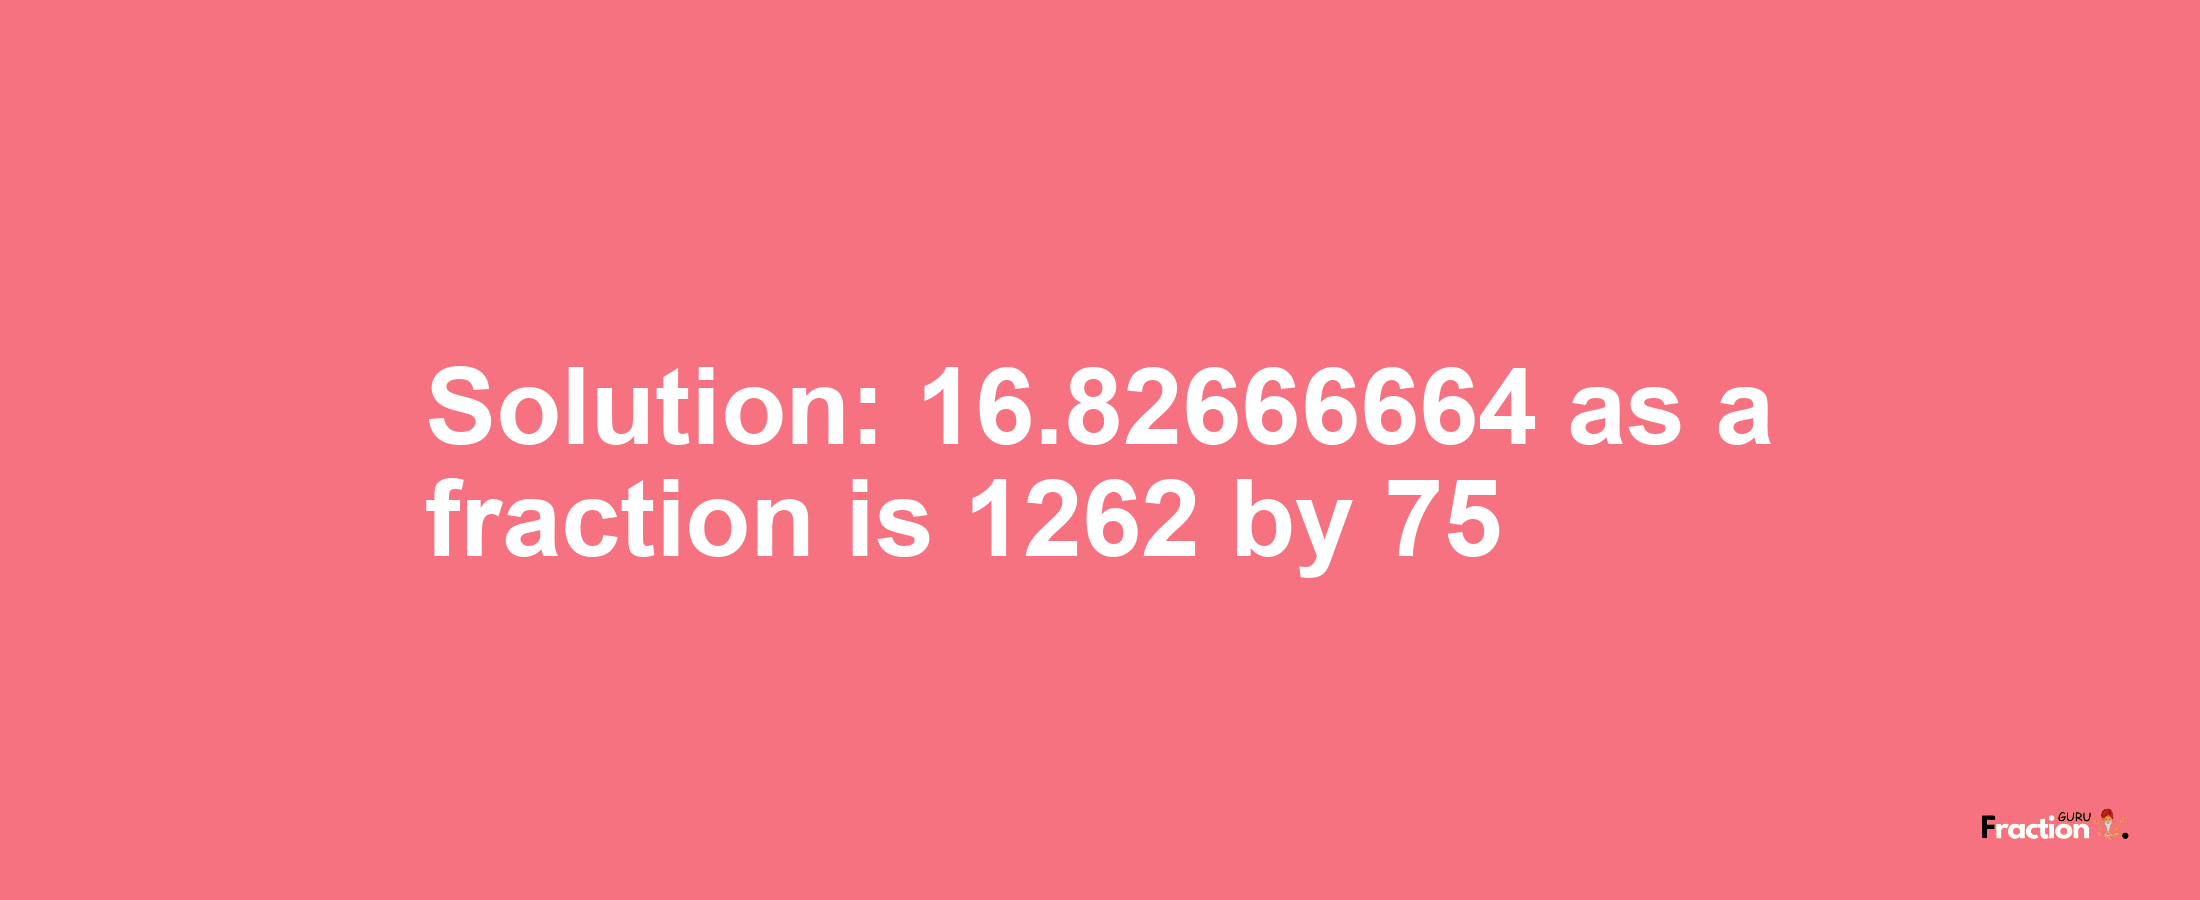 Solution:16.82666664 as a fraction is 1262/75